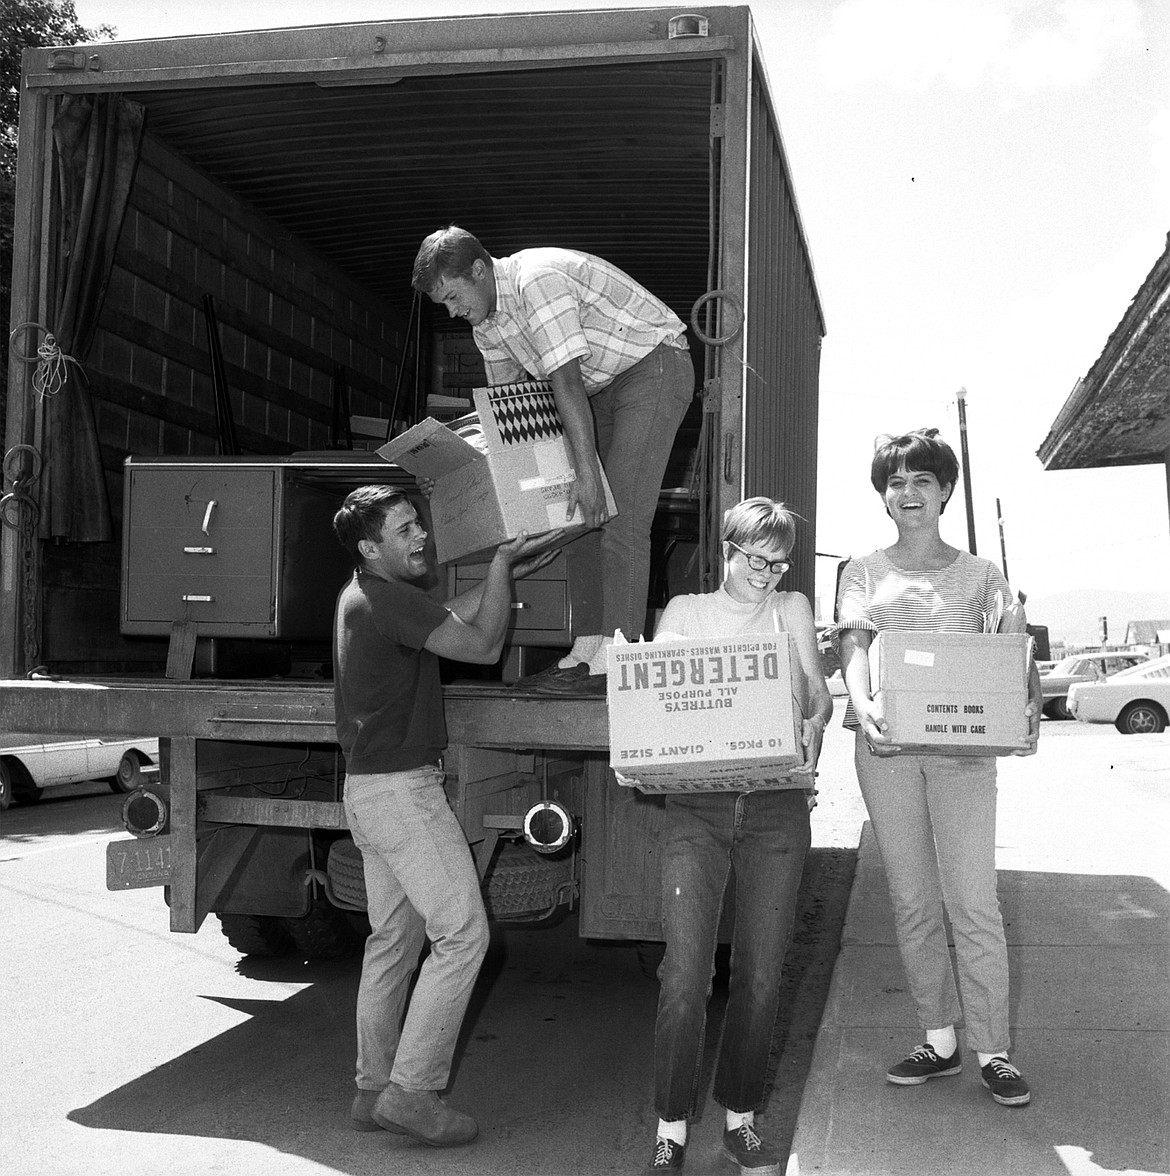 It was moving day Monday for the FlatheadValley Community College. Boxes of supplies,office furniture, typewriters, everything wasmoved out of the old Post Office Building tothe Depot Building. Here Bruce Quande, summerwork-study student from the University of Montana, hands boxes down out of the moving truck.  Receiving the box from Quandeis Ron Phelps, another work-study student.Pat Elliott, wearing glasses, strains with abig box. She is a university work-study student.At right is Darlene Wirtz, CommunityCollege secretary. (Inter Lake staff photo)